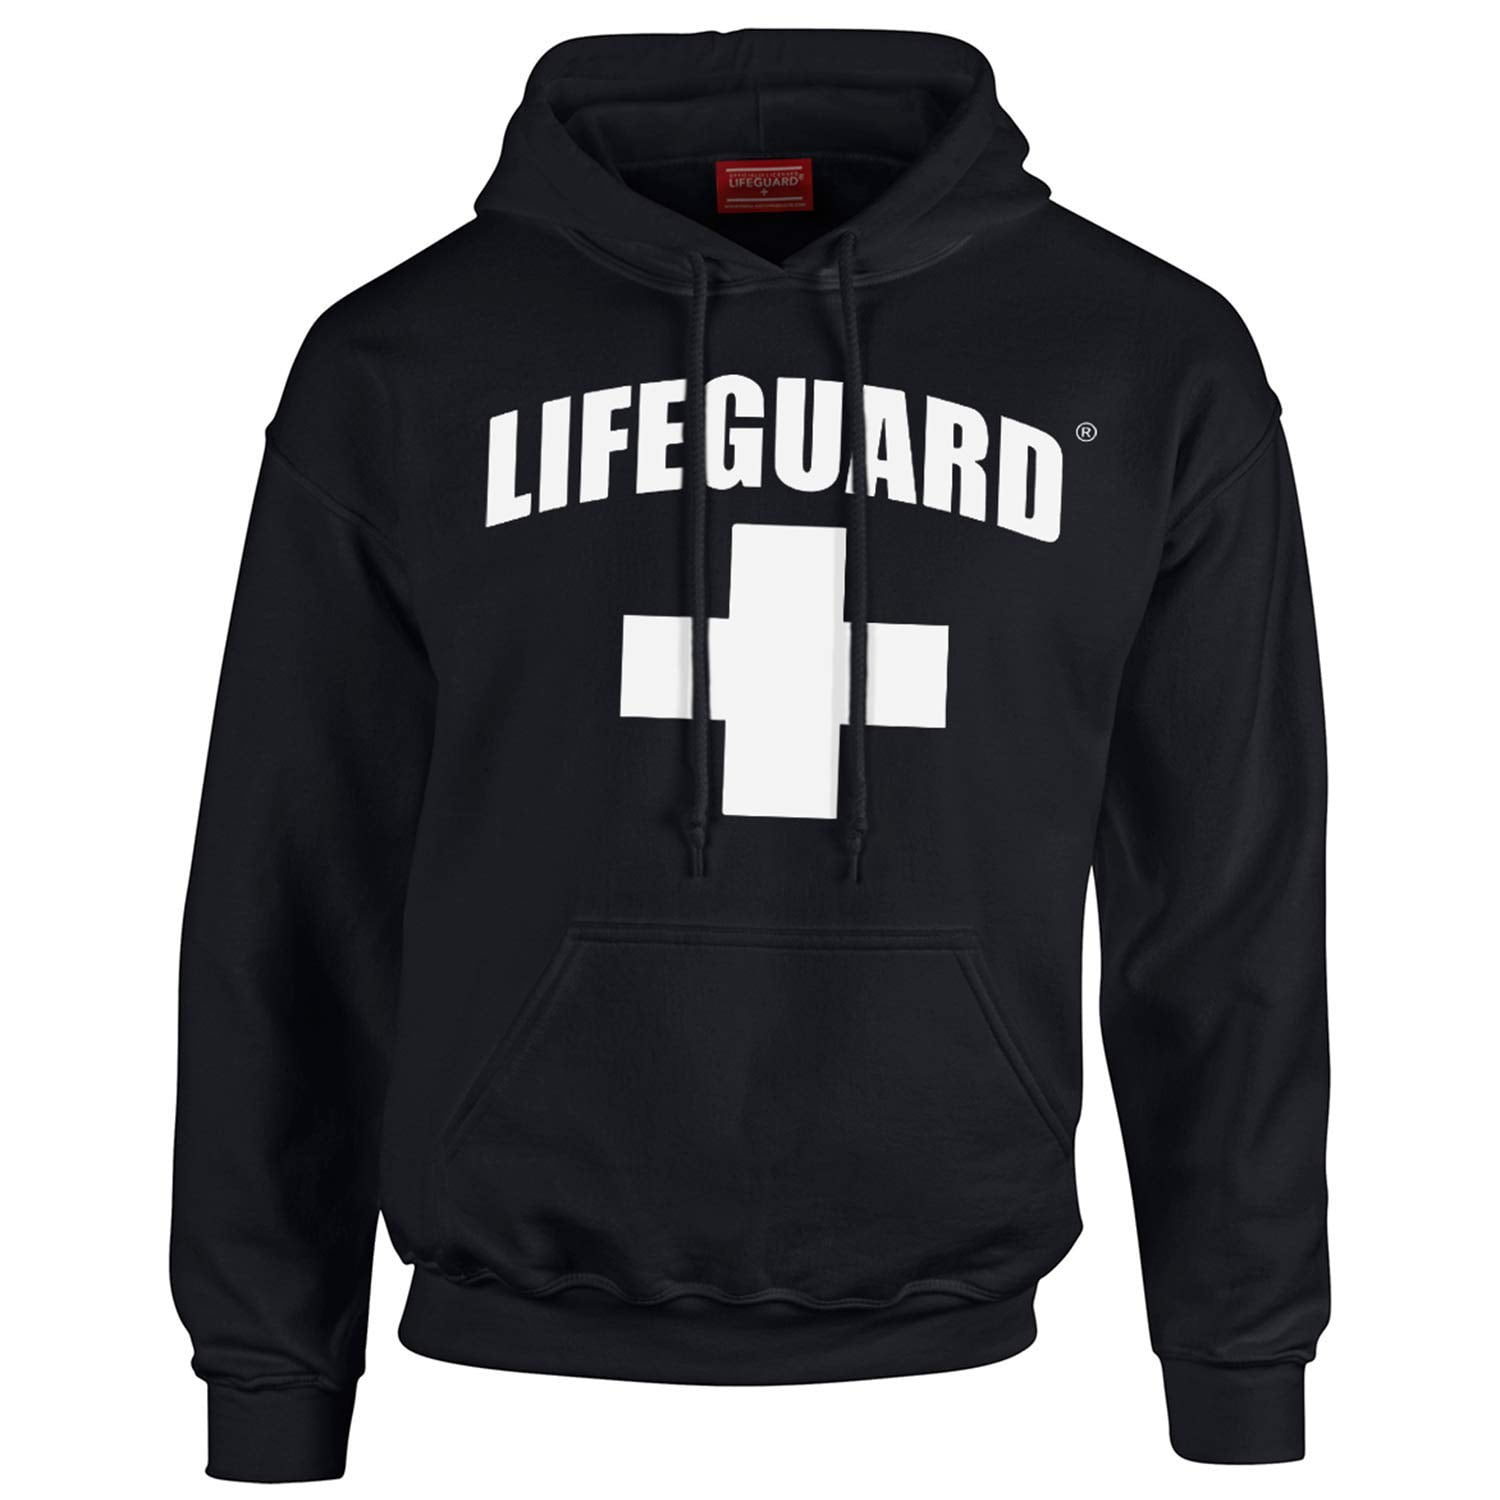 LIFEGUARD Officially Licensed First Quality Pullover Hooded Sweatshirt ...